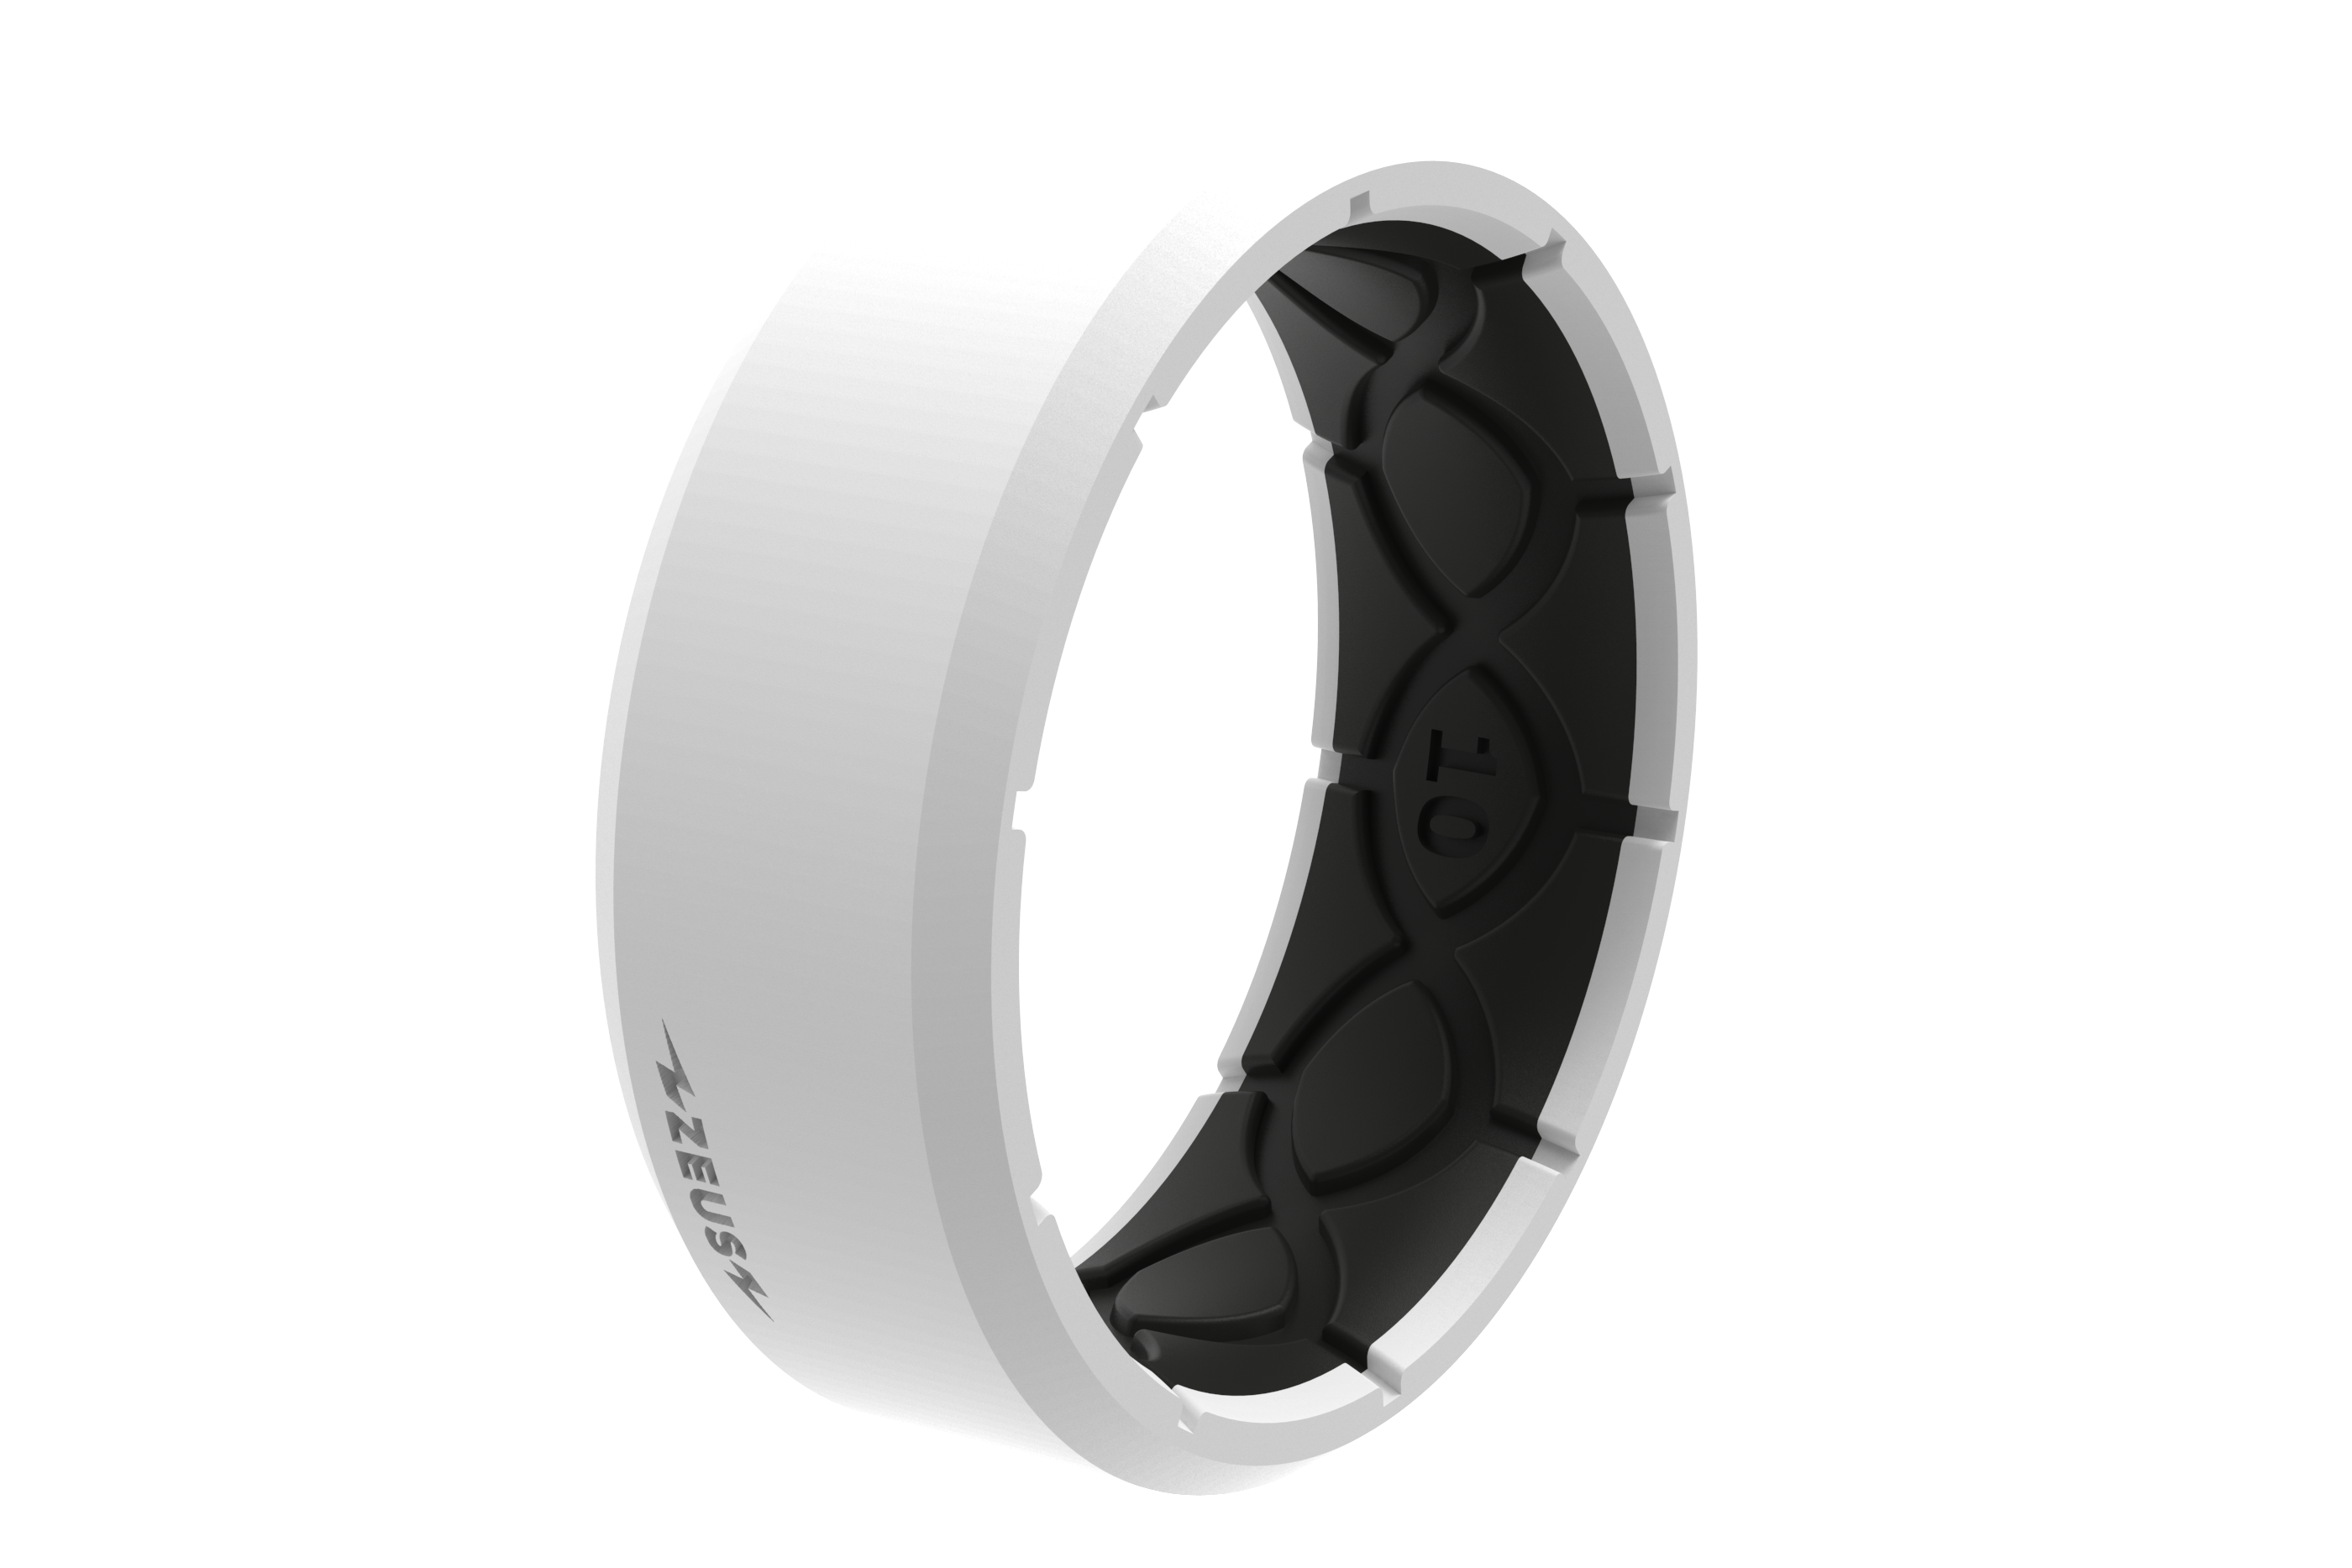 Zeus Edge Tundra Ring on its side